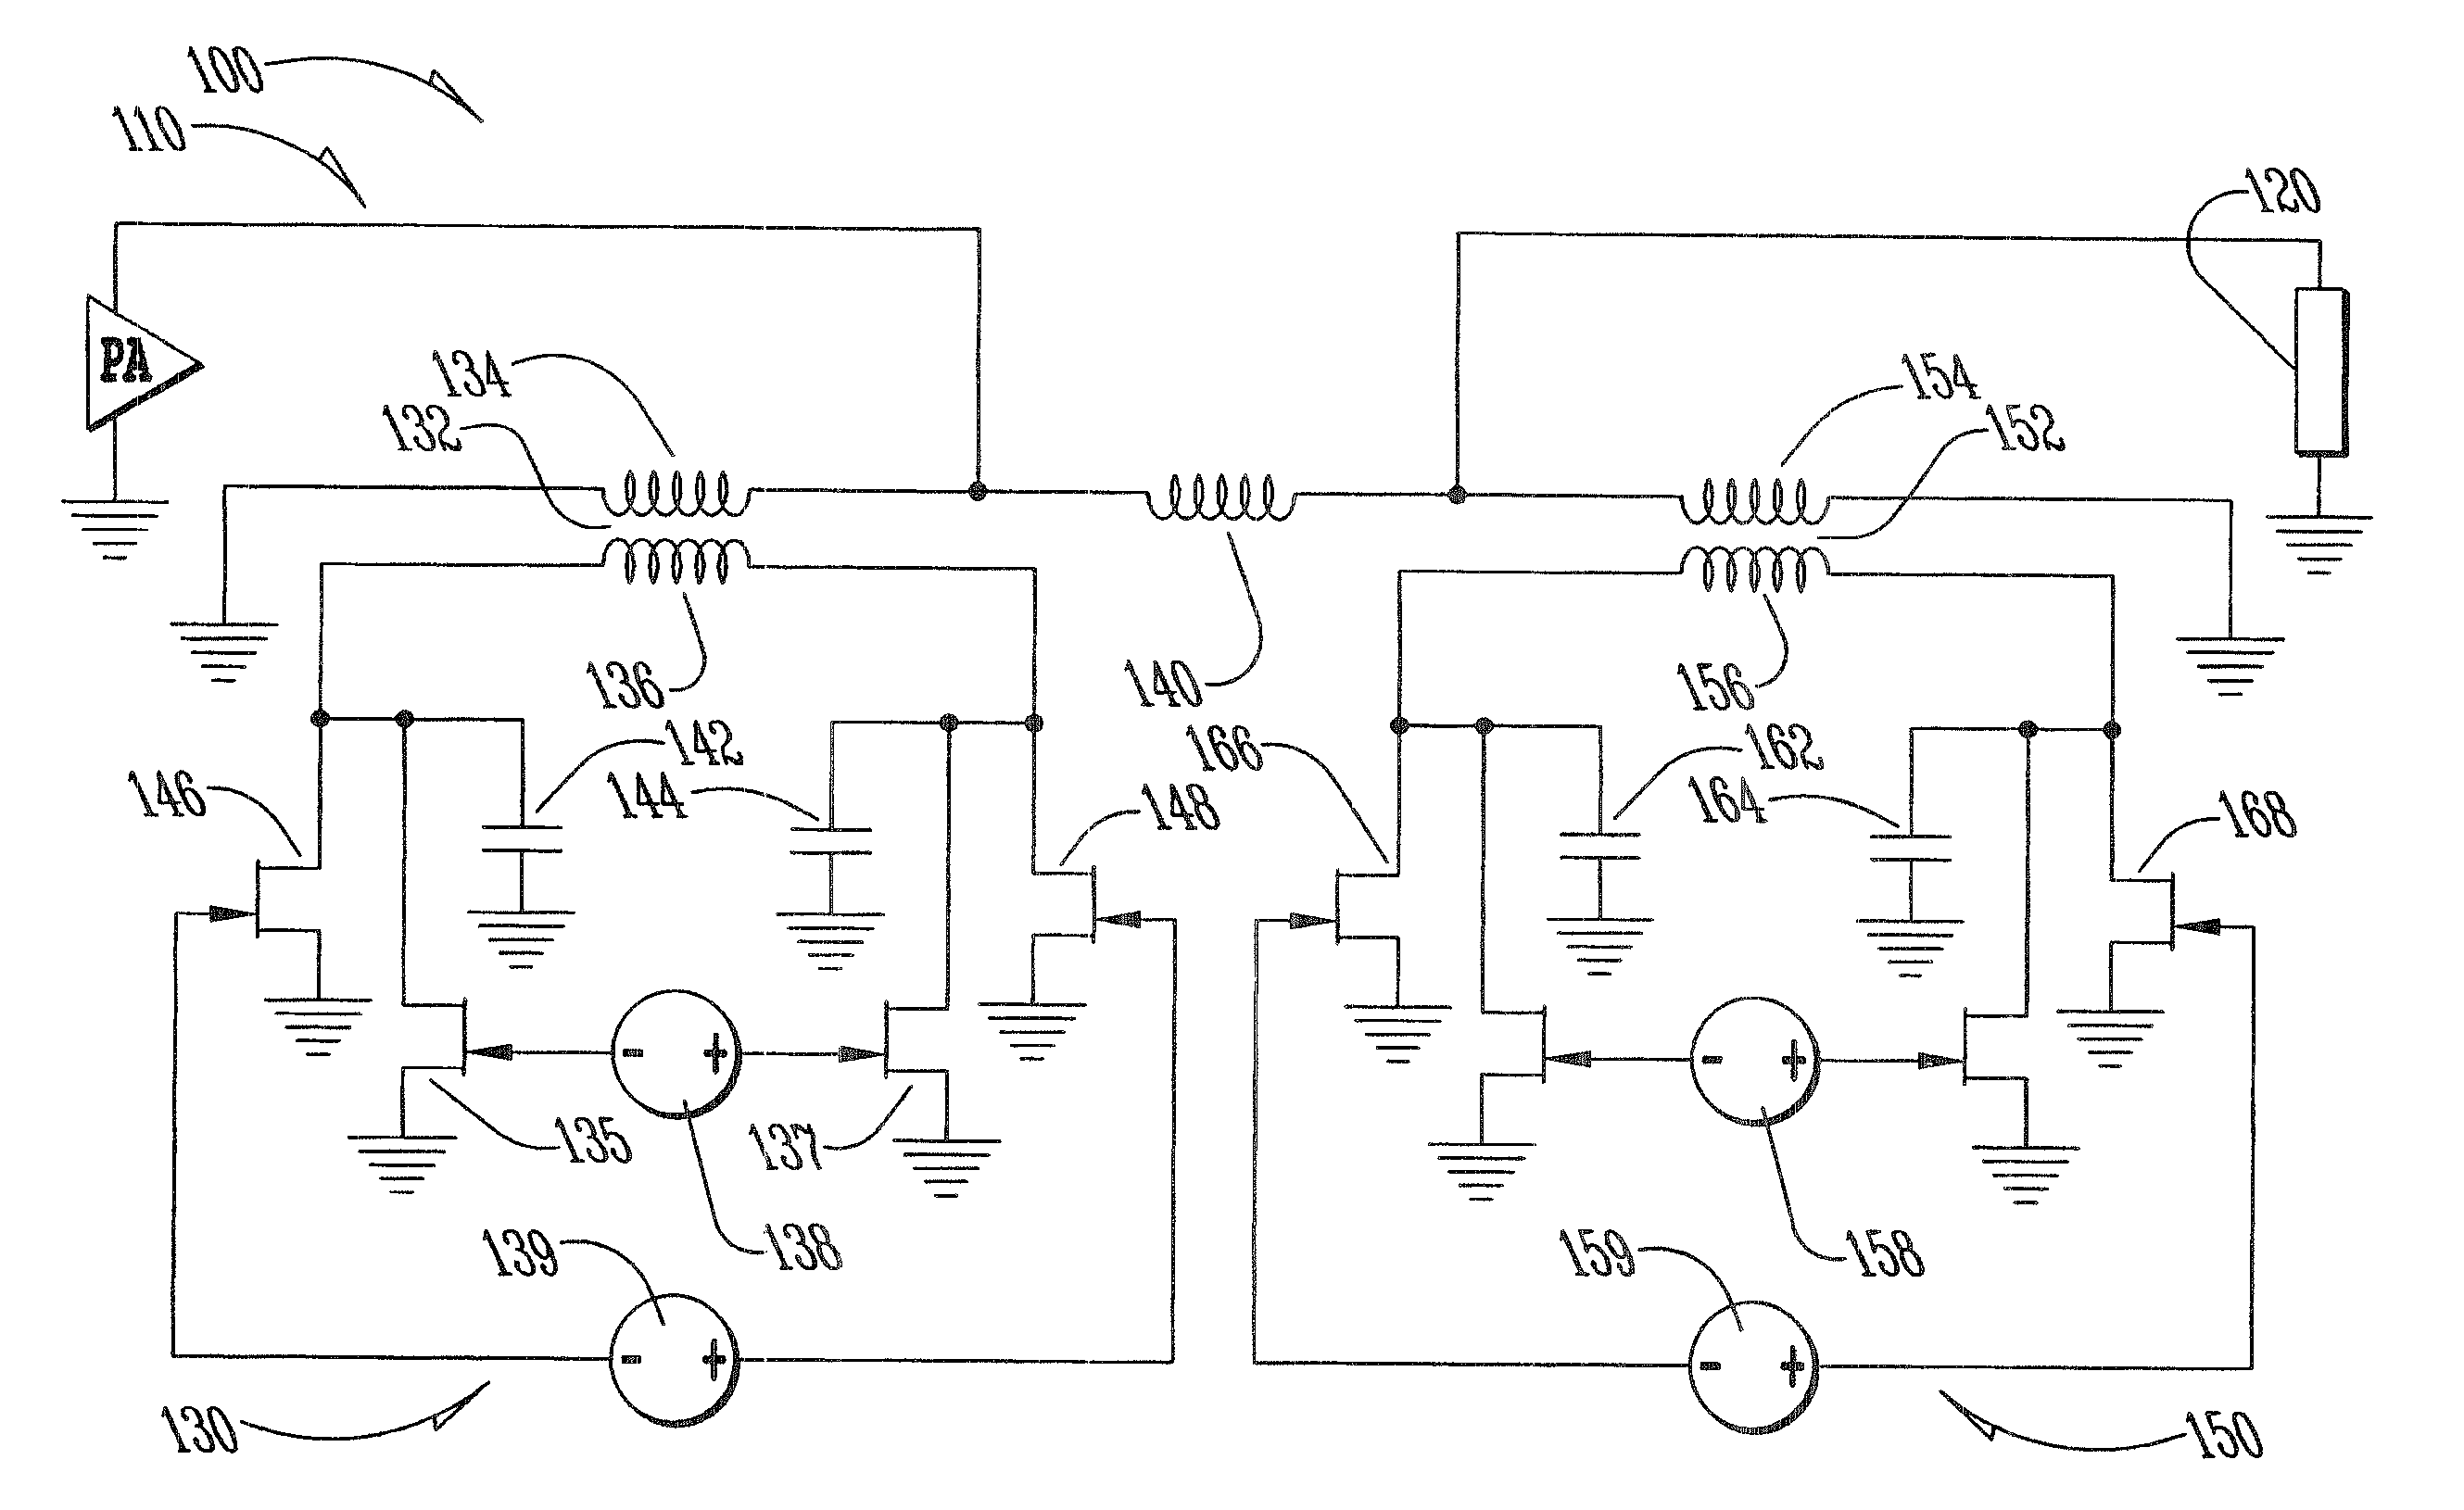 Switched impedance synthesis transmit antenna matching system for electrically small antenna radiators